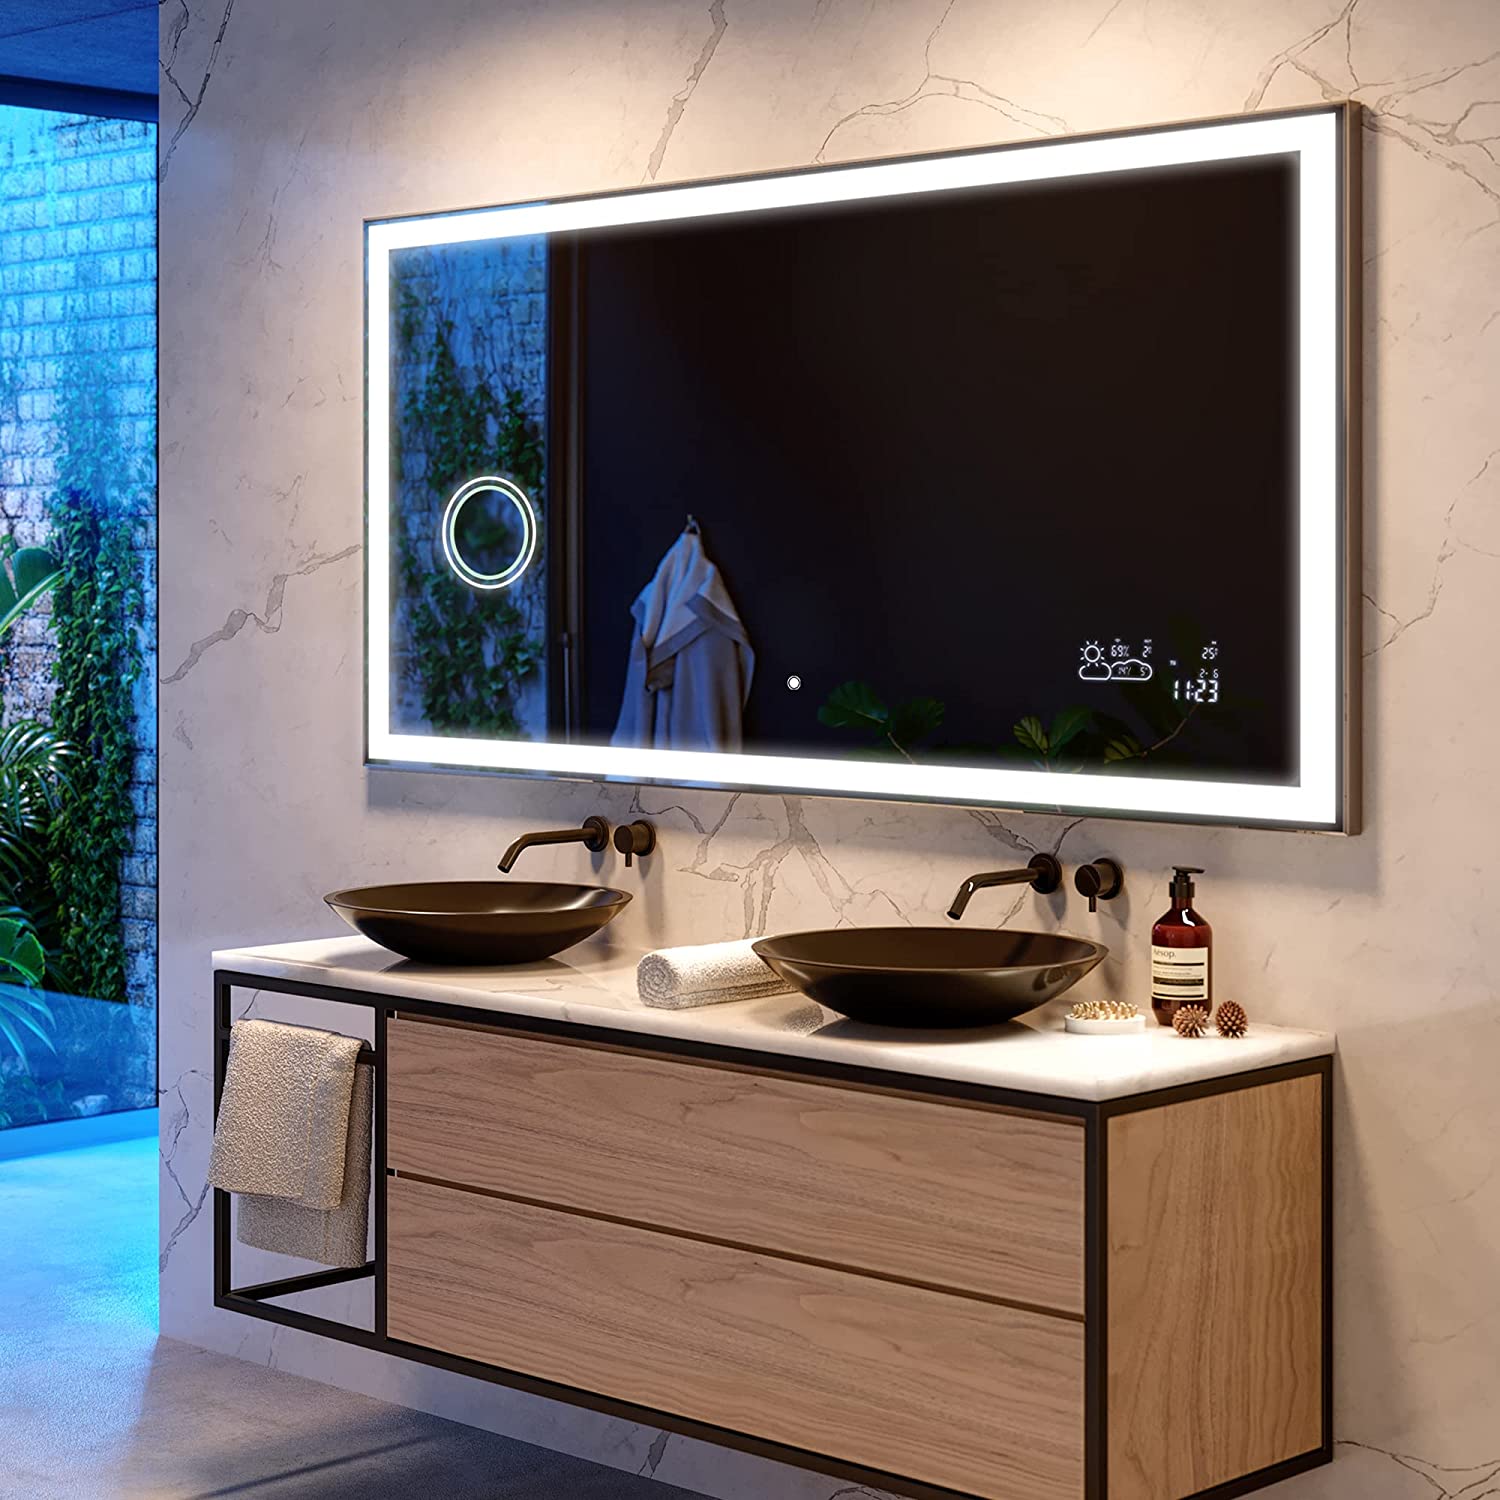 How to Build Your Own Smart Mirror